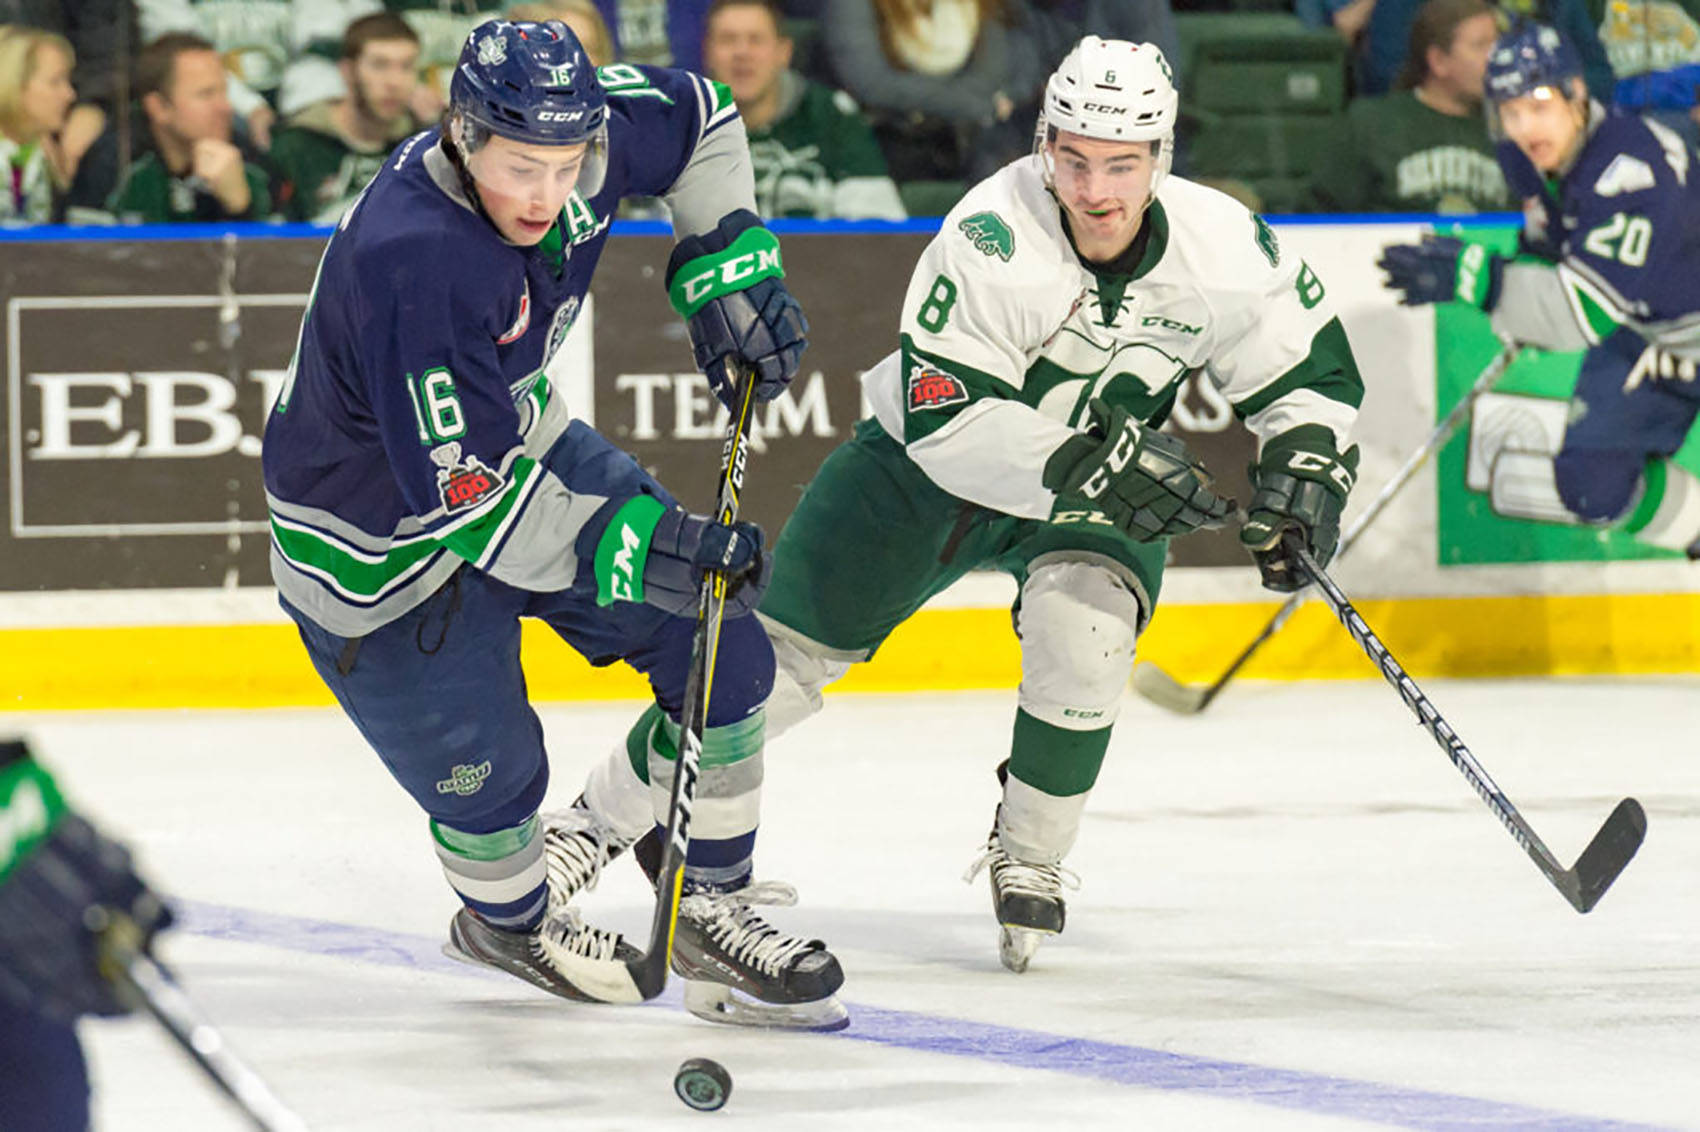 Thunderbirds center Noah Philp handles the puck with the Silvertips’ Patrick Bajkov defending during WHL play Saturday night in Everett. COURTESY PHOTO, Brian Liesse, T-Birds